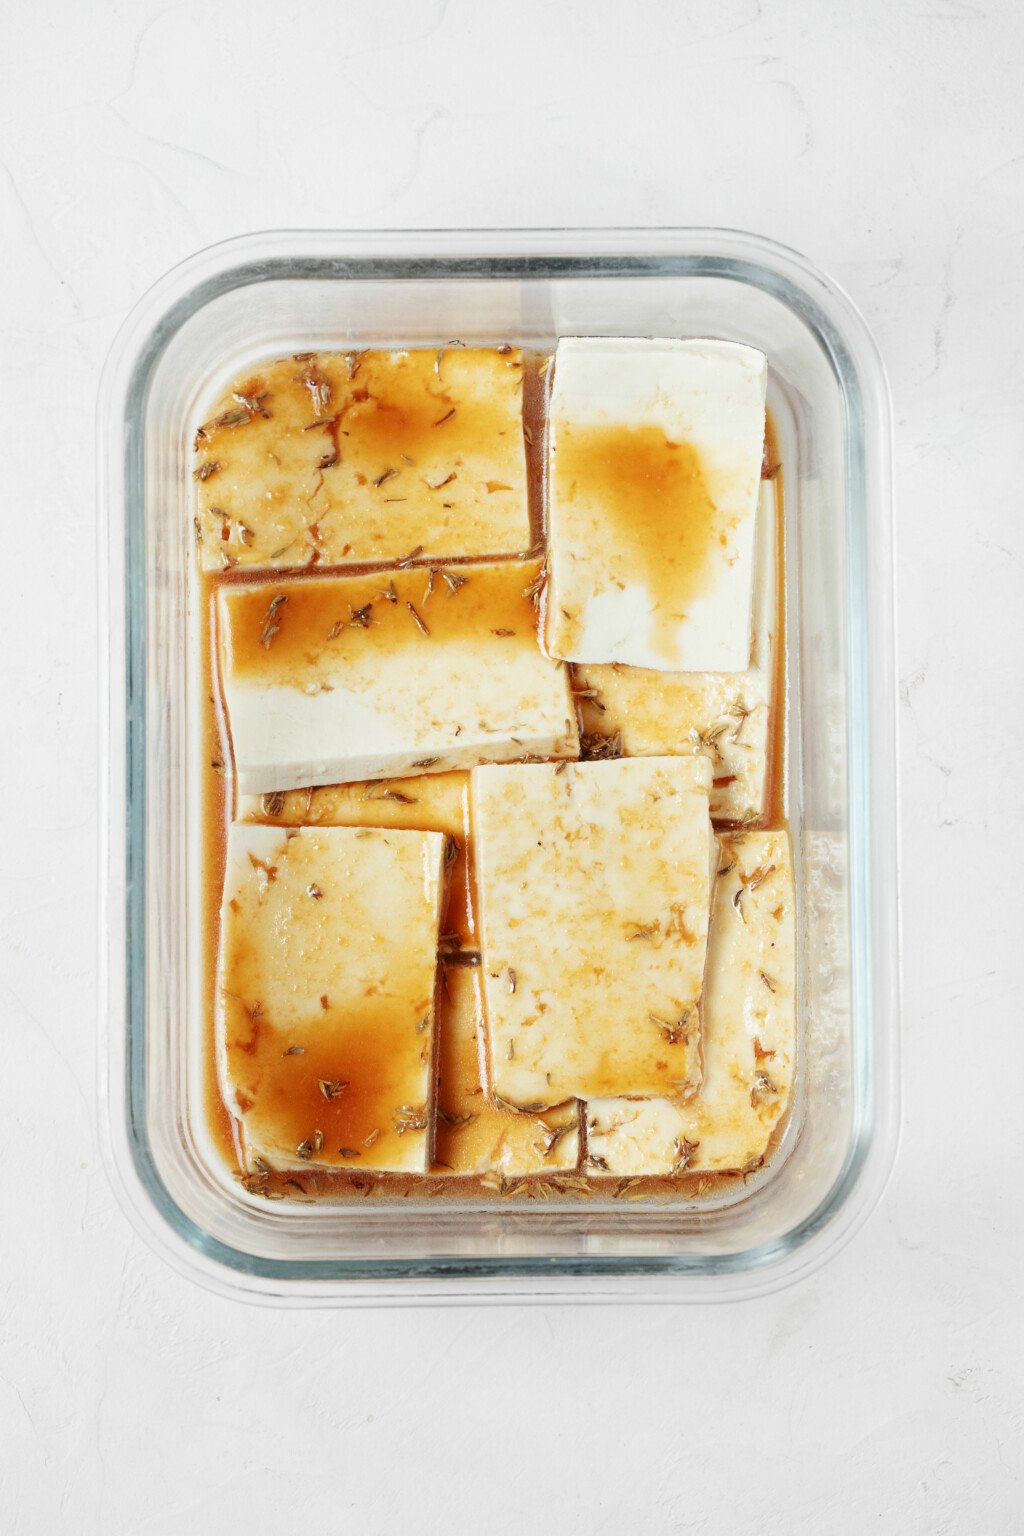 An overhead image of a glass storage container, in which slices of tofu have been piled and covered in marinade.